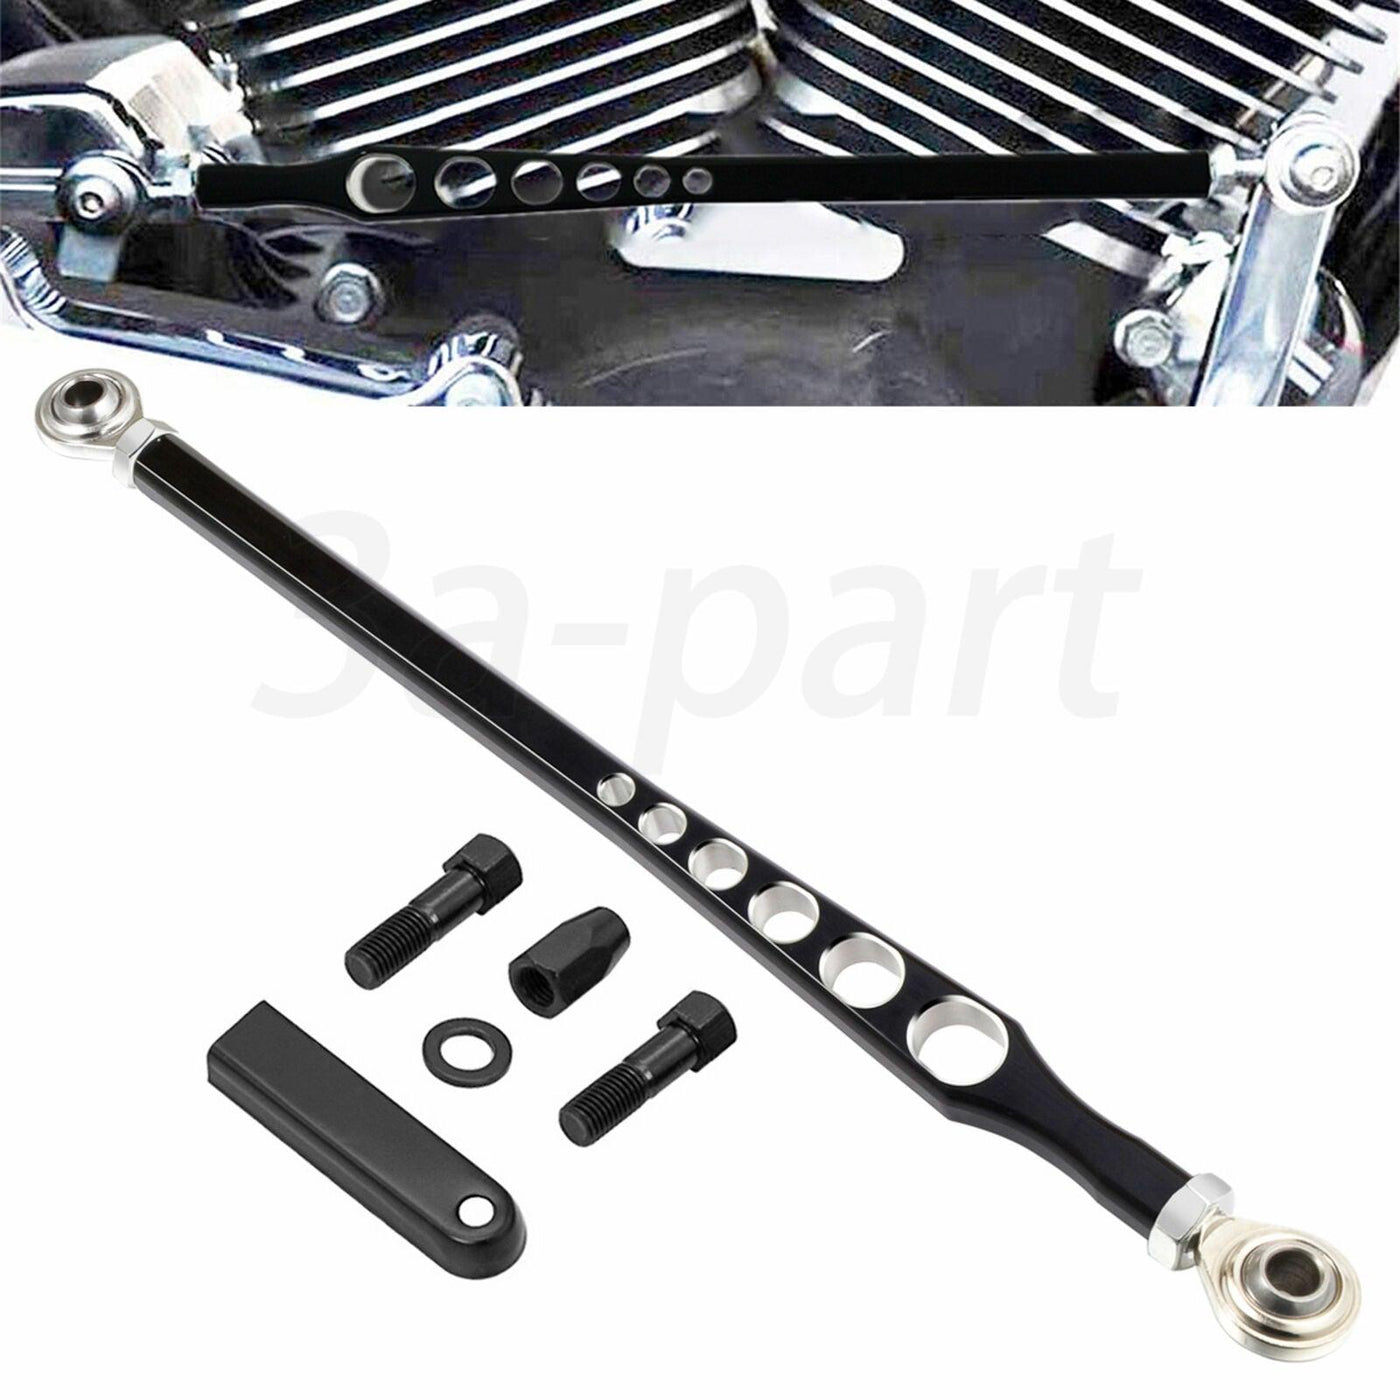 Black Shift Linkage Shifter Link Fit For Harley Touring Softail Road King 80-22 - Moto Life Products